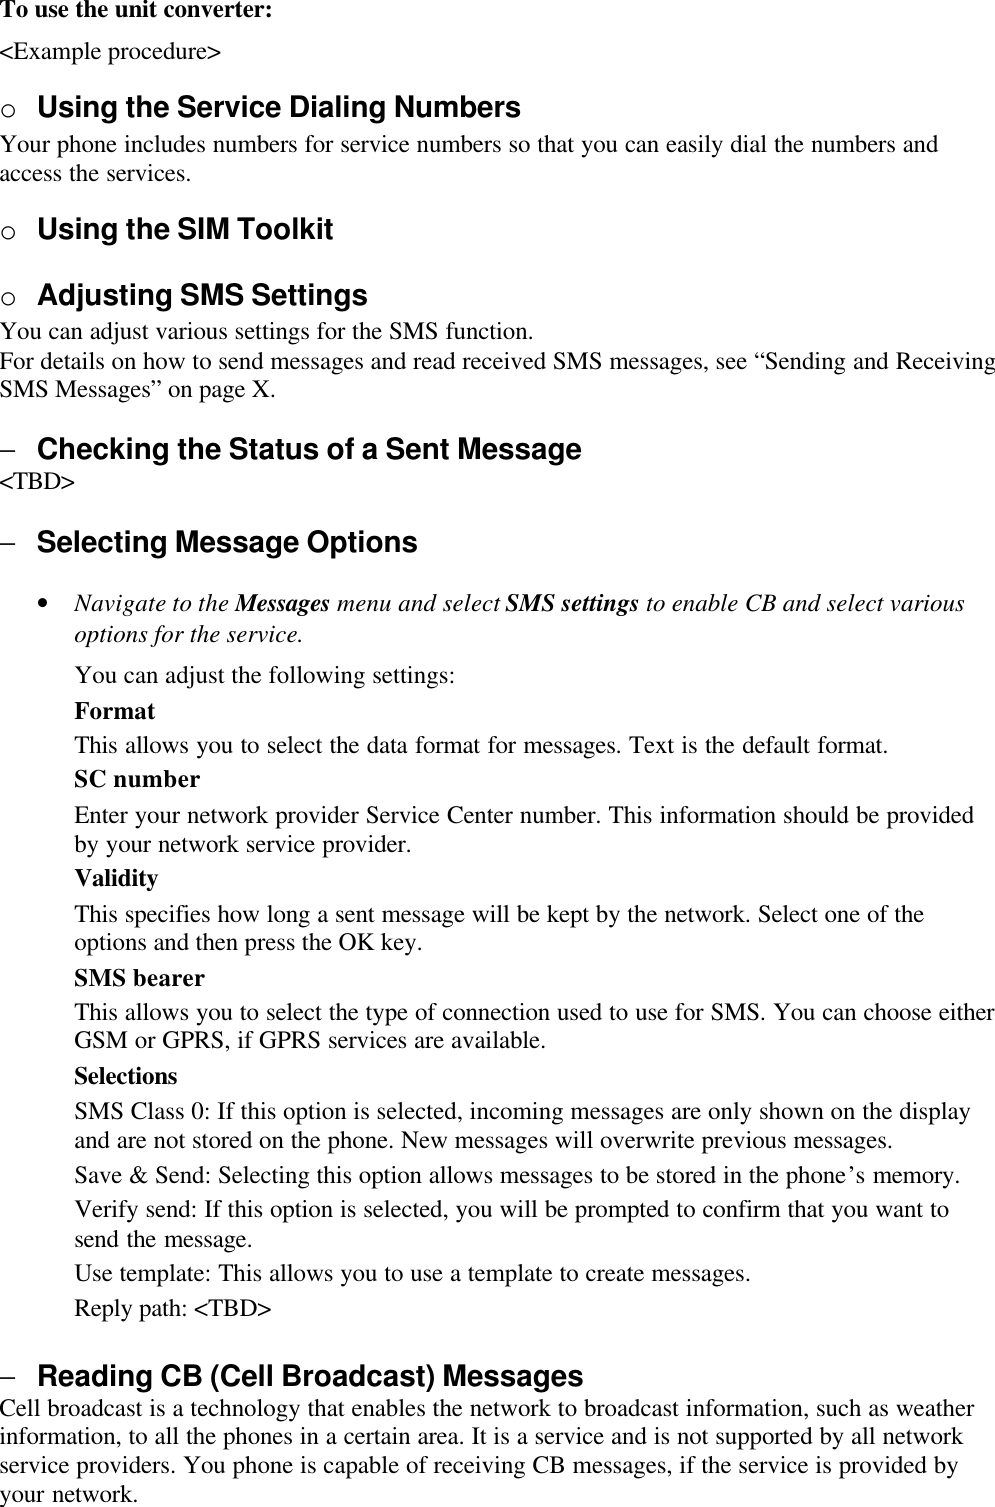 To use the unit converter:&lt;Example procedure&gt;o Using the Service Dialing NumbersYour phone includes numbers for service numbers so that you can easily dial the numbers andaccess the services.o Using the SIM Toolkito Adjusting SMS SettingsYou can adjust various settings for the SMS function.For details on how to send messages and read received SMS messages, see “Sending and ReceivingSMS Messages” on page X.− Checking the Status of a Sent Message&lt;TBD&gt;− Selecting Message Options• Navigate to the Messages menu and select SMS settings to enable CB and select variousoptions for the service.You can adjust the following settings:FormatThis allows you to select the data format for messages. Text is the default format.SC numberEnter your network provider Service Center number. This information should be providedby your network service provider.ValidityThis specifies how long a sent message will be kept by the network. Select one of theoptions and then press the OK key.SMS bearerThis allows you to select the type of connection used to use for SMS. You can choose eitherGSM or GPRS, if GPRS services are available.SelectionsSMS Class 0: If this option is selected, incoming messages are only shown on the displayand are not stored on the phone. New messages will overwrite previous messages.Save &amp; Send: Selecting this option allows messages to be stored in the phone’s memory.Verify send: If this option is selected, you will be prompted to confirm that you want tosend the message.Use template: This allows you to use a template to create messages.Reply path: &lt;TBD&gt;− Reading CB (Cell Broadcast) MessagesCell broadcast is a technology that enables the network to broadcast information, such as weatherinformation, to all the phones in a certain area. It is a service and is not supported by all networkservice providers. You phone is capable of receiving CB messages, if the service is provided byyour network.